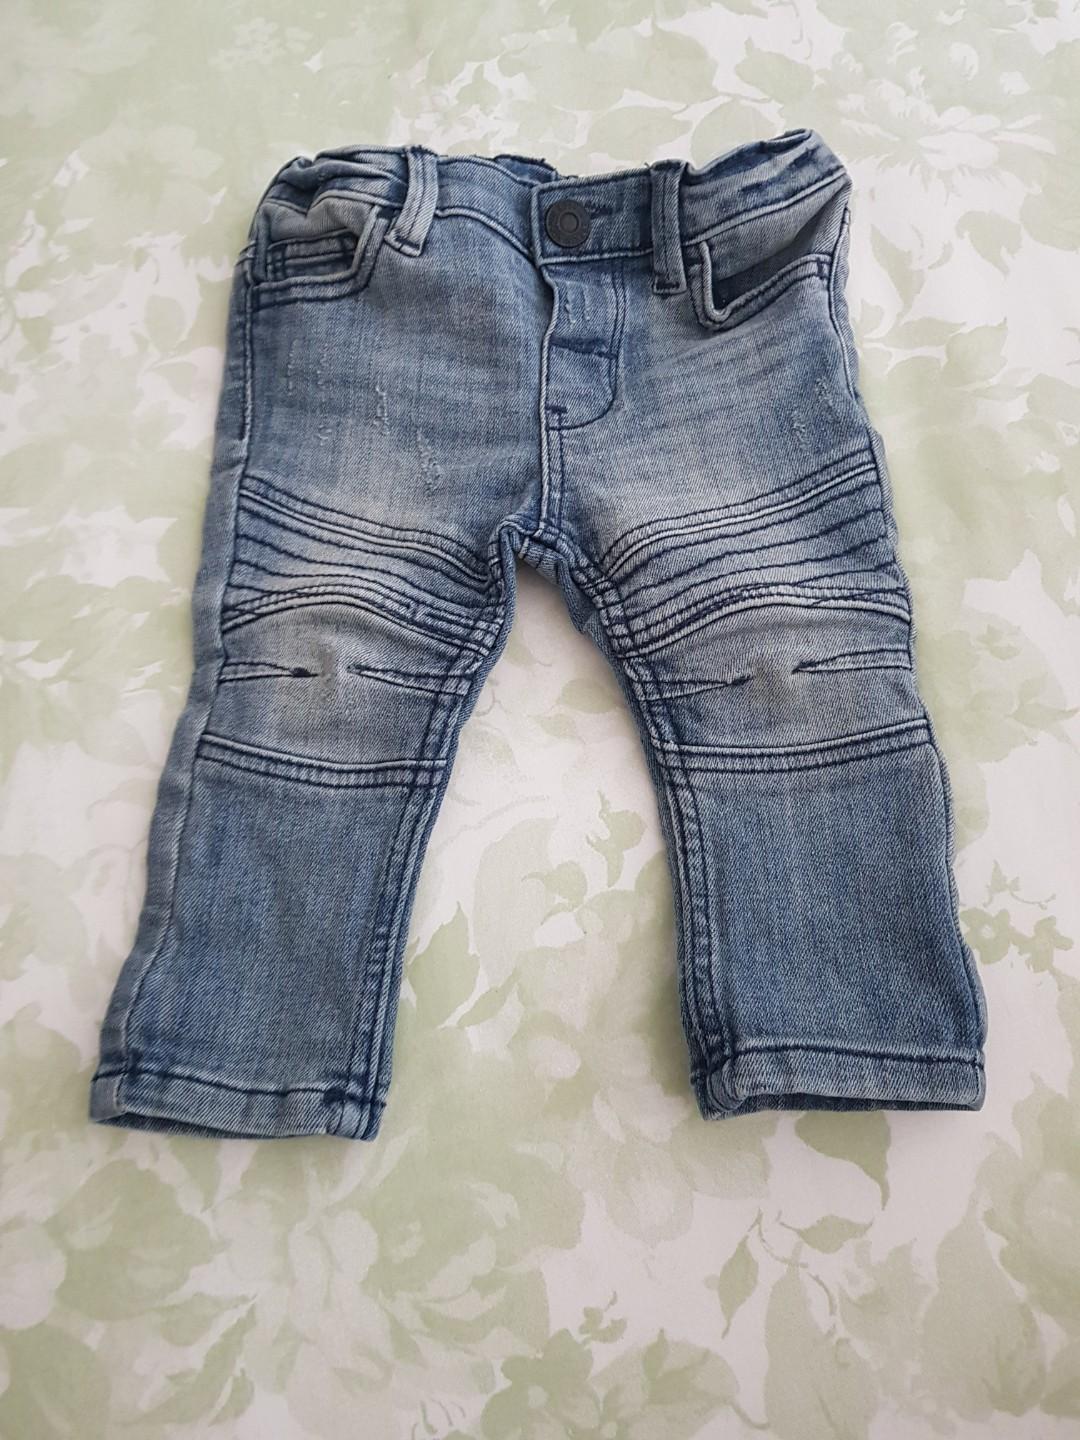 h&m baby jeans